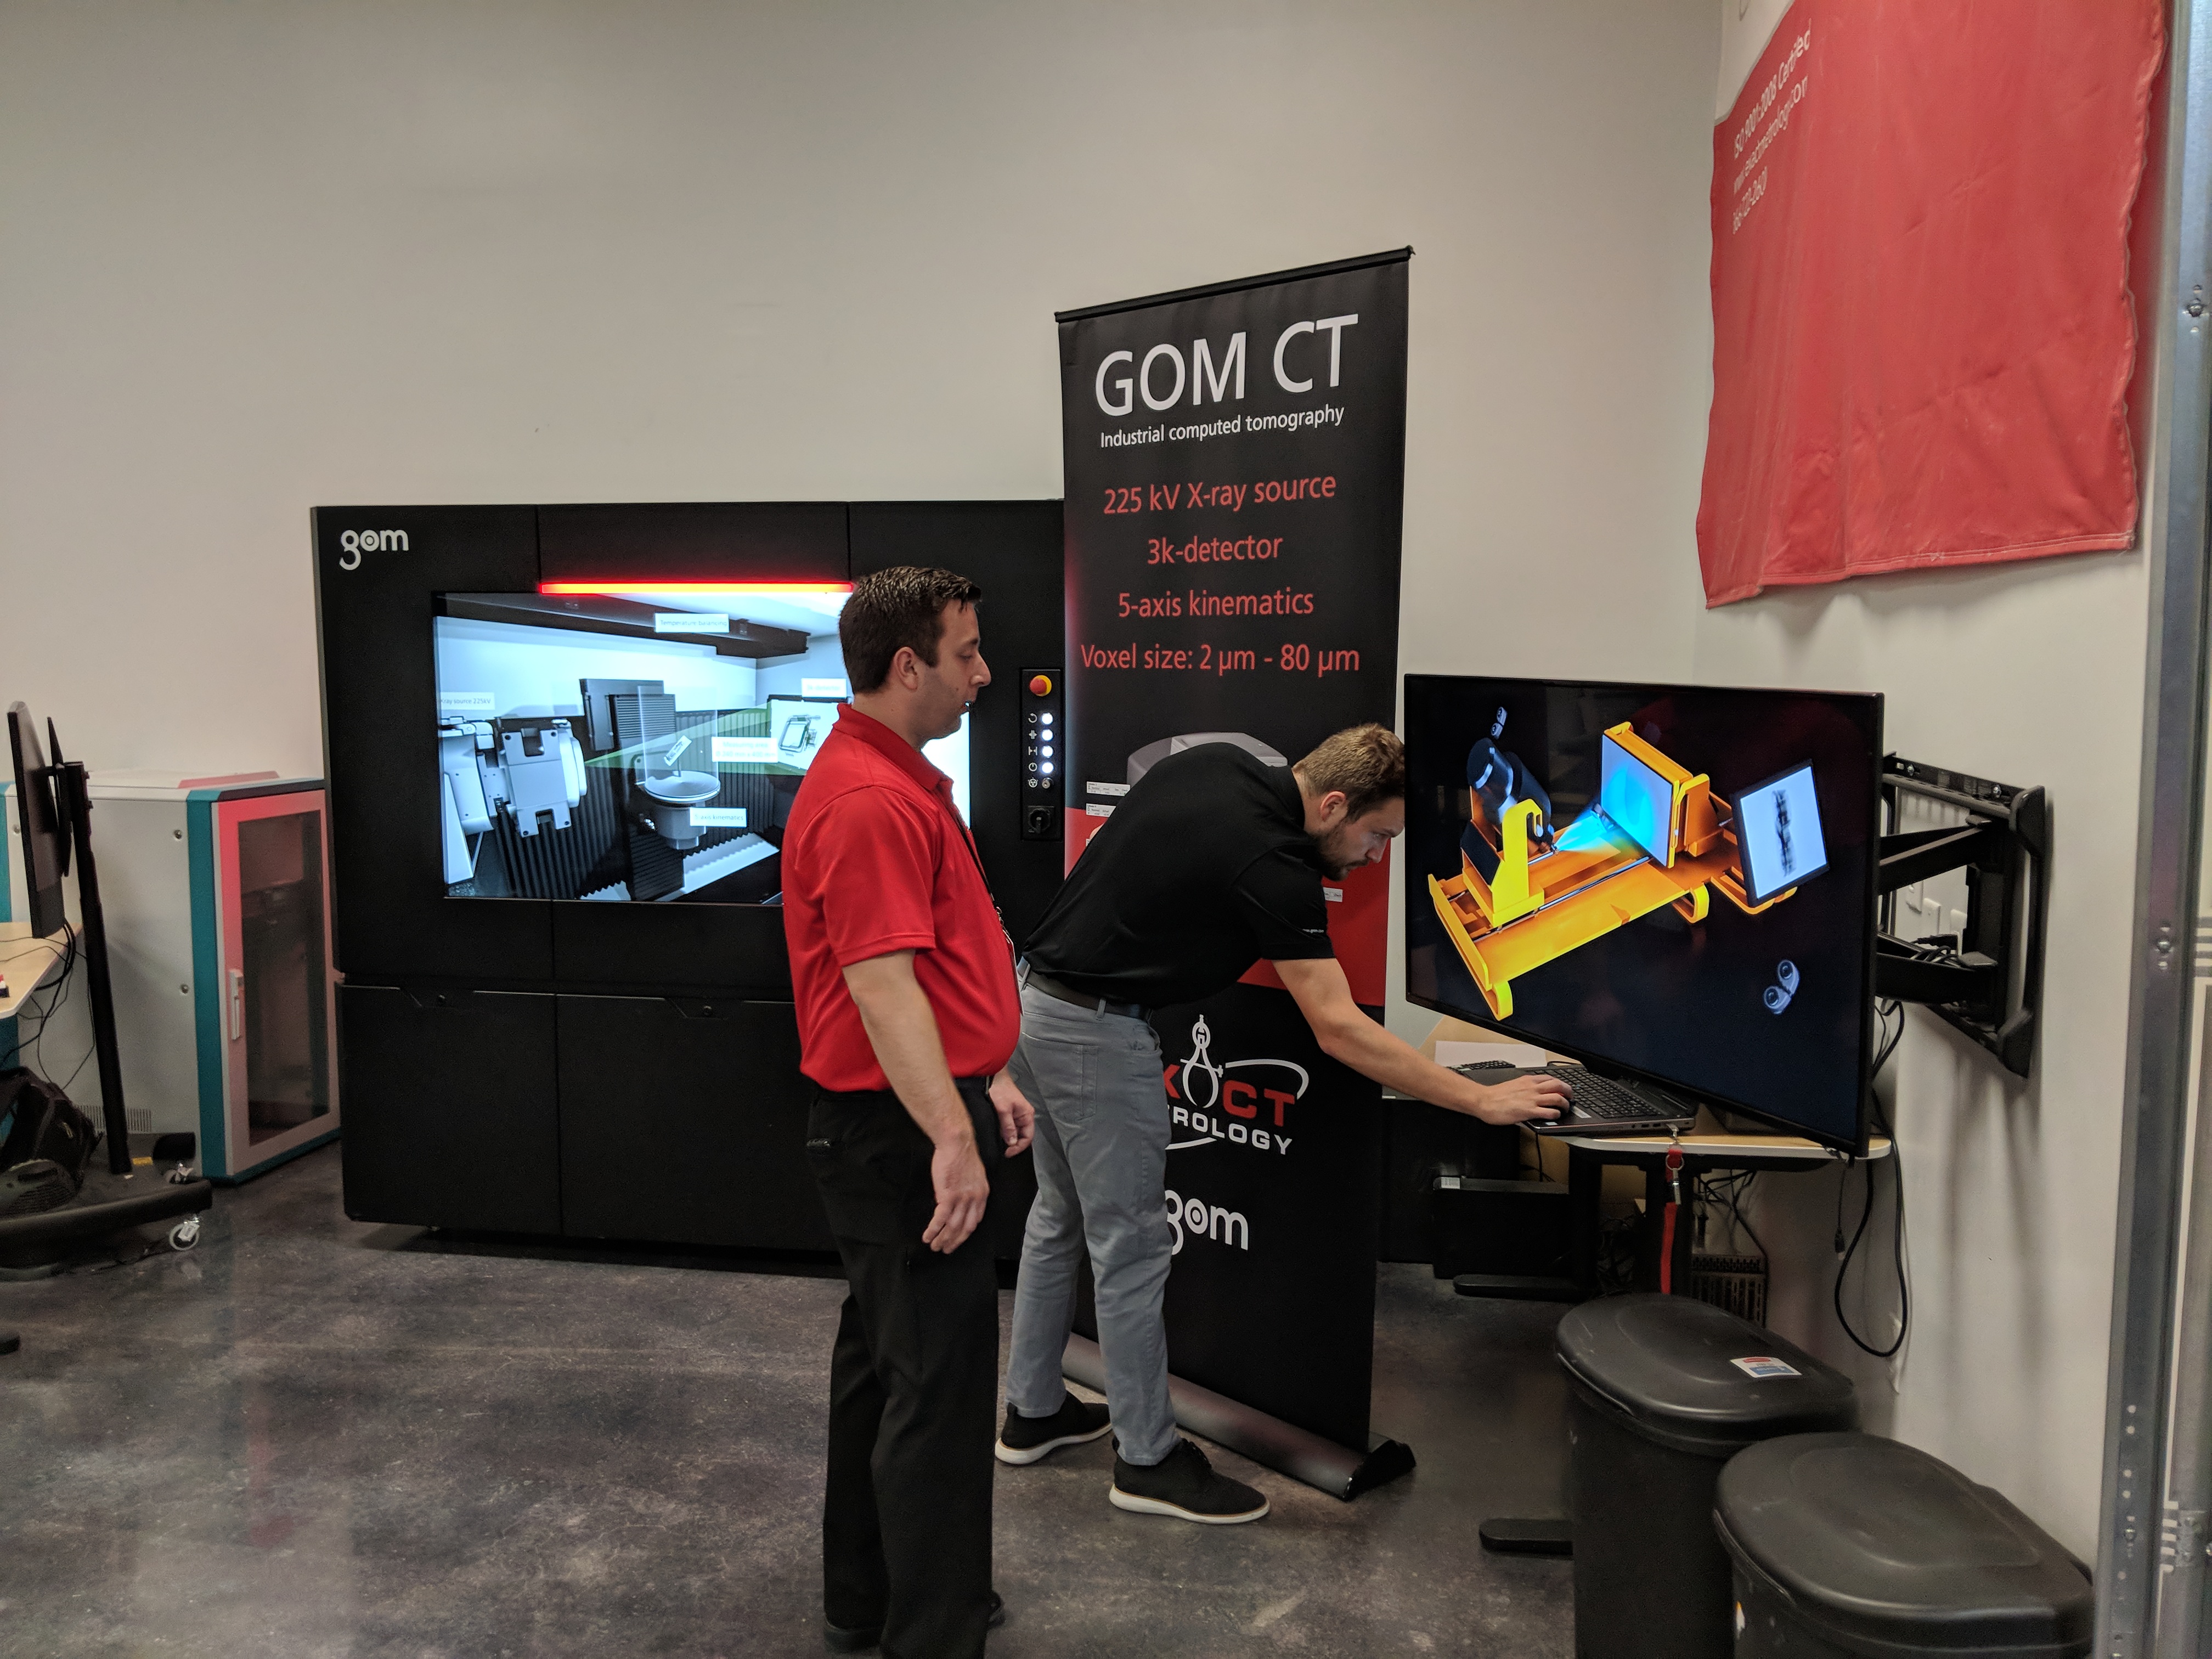 Scanning with the GOM CT 